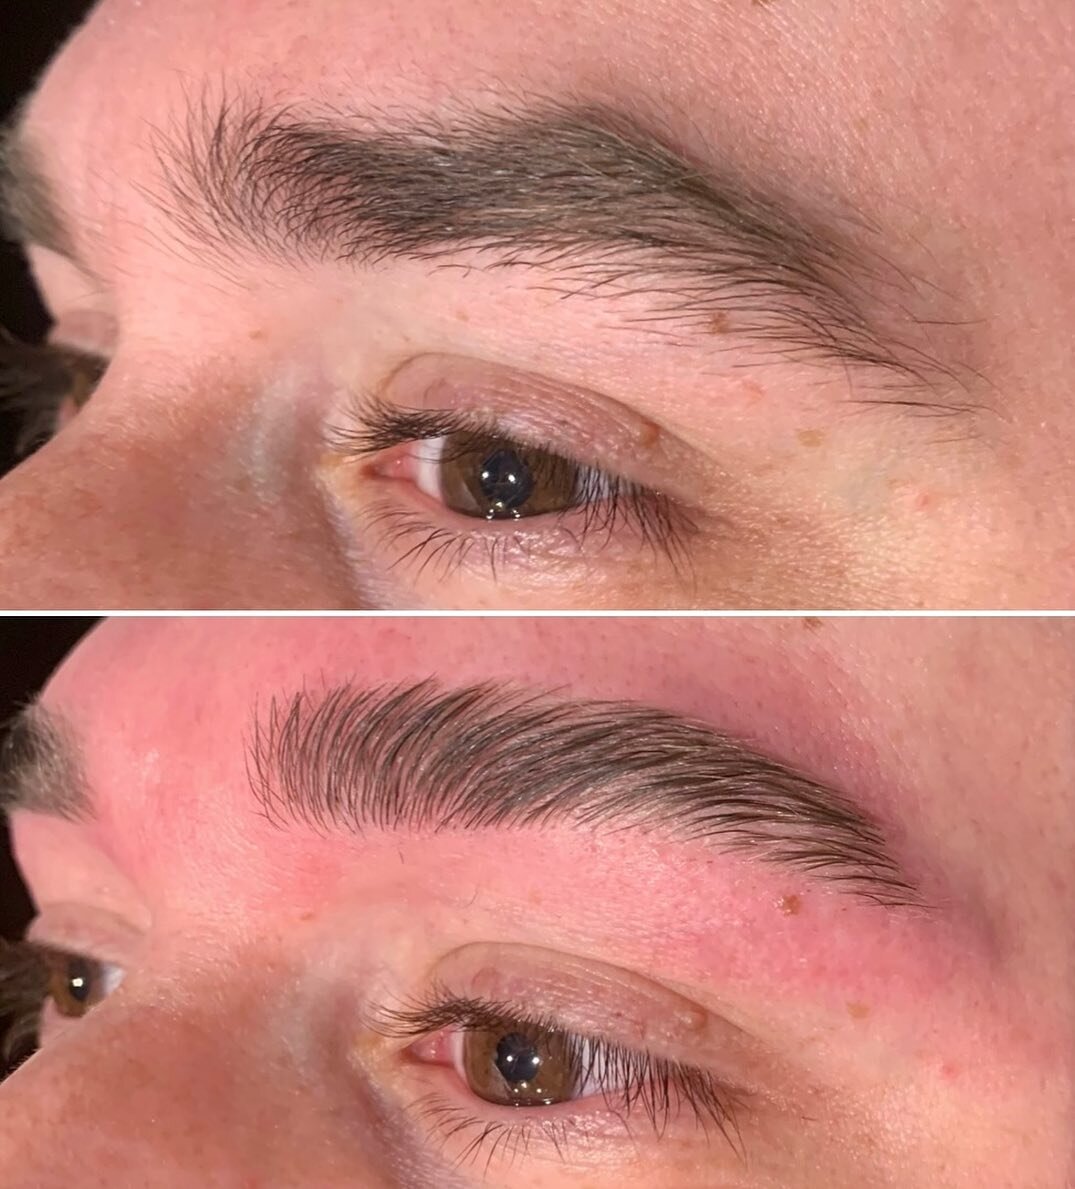 Gents, let's get ready to make a subtle, yet bold statement! #BrowWaxing is the perfect way to keep your look professional and polished. Get those groomed brows and stand out from the crowd but with that #jenesaisquoi factor. No one needs to know&hel